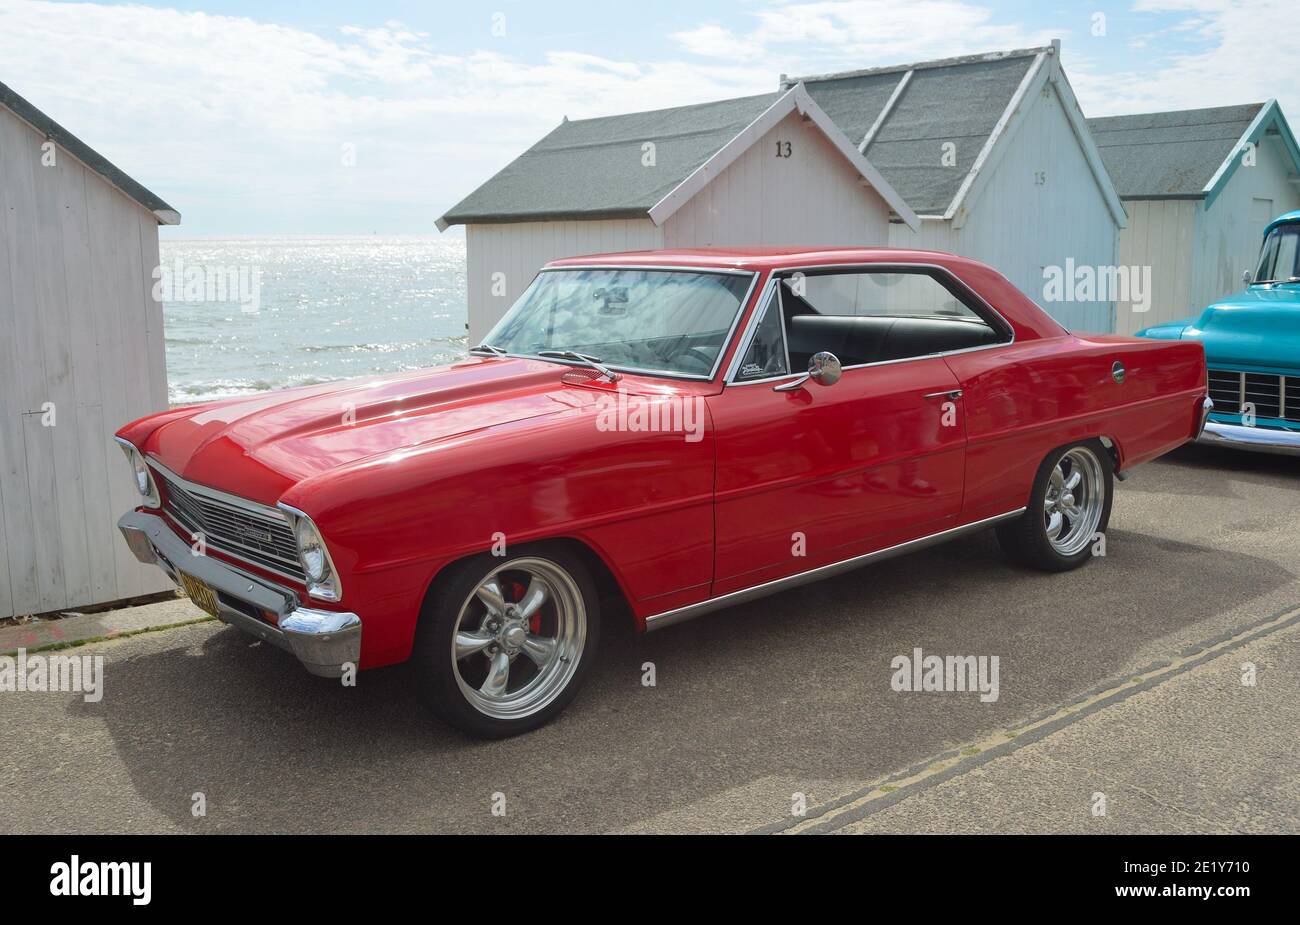 Classic red Chevrolet Chevy II motorcar on Felixstowe seafront. Stock Photo